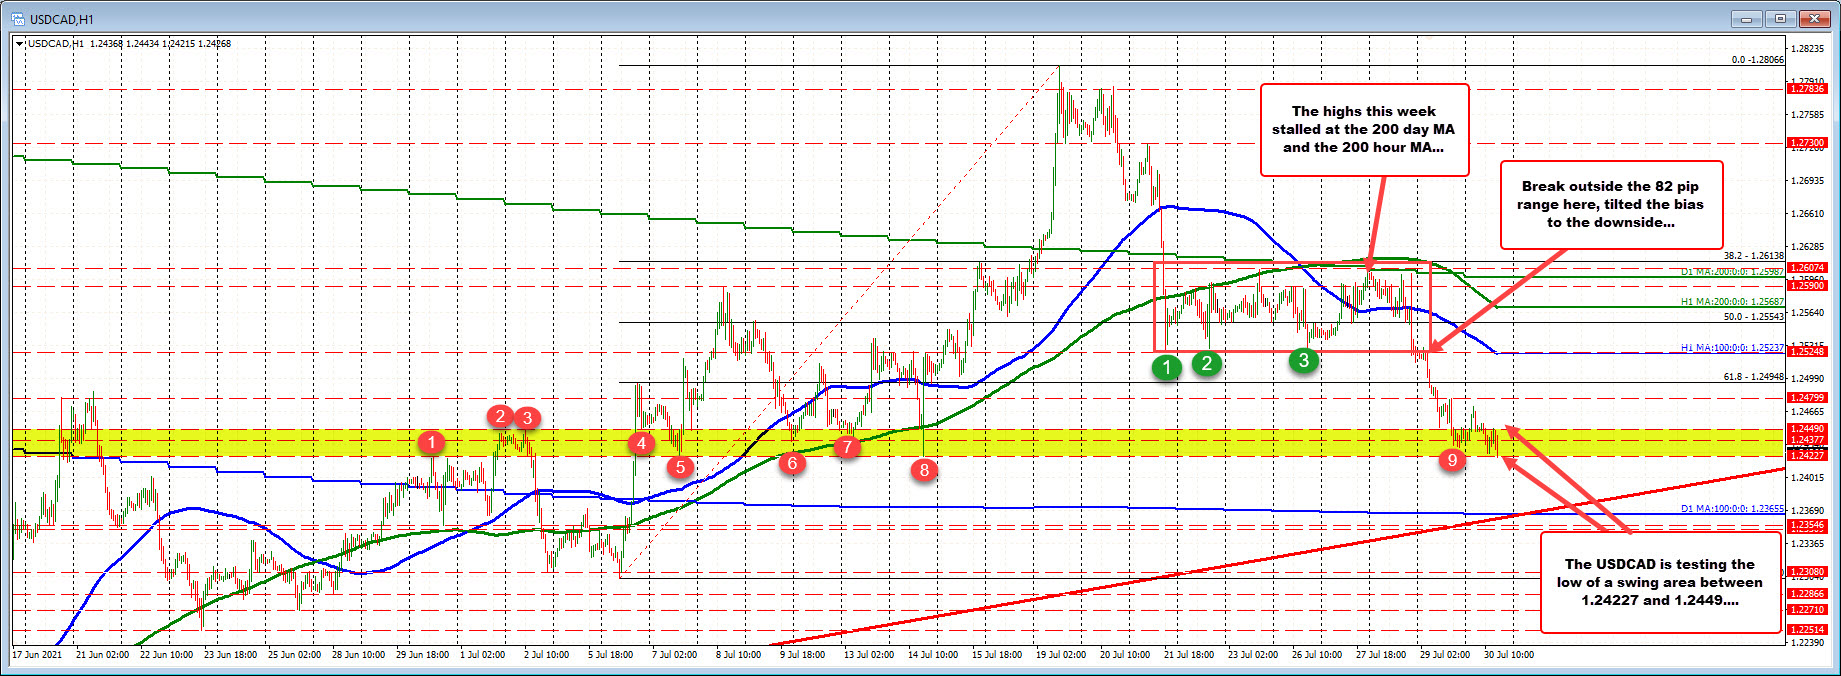 The swing area come to between 1.24227 and 1.24490_